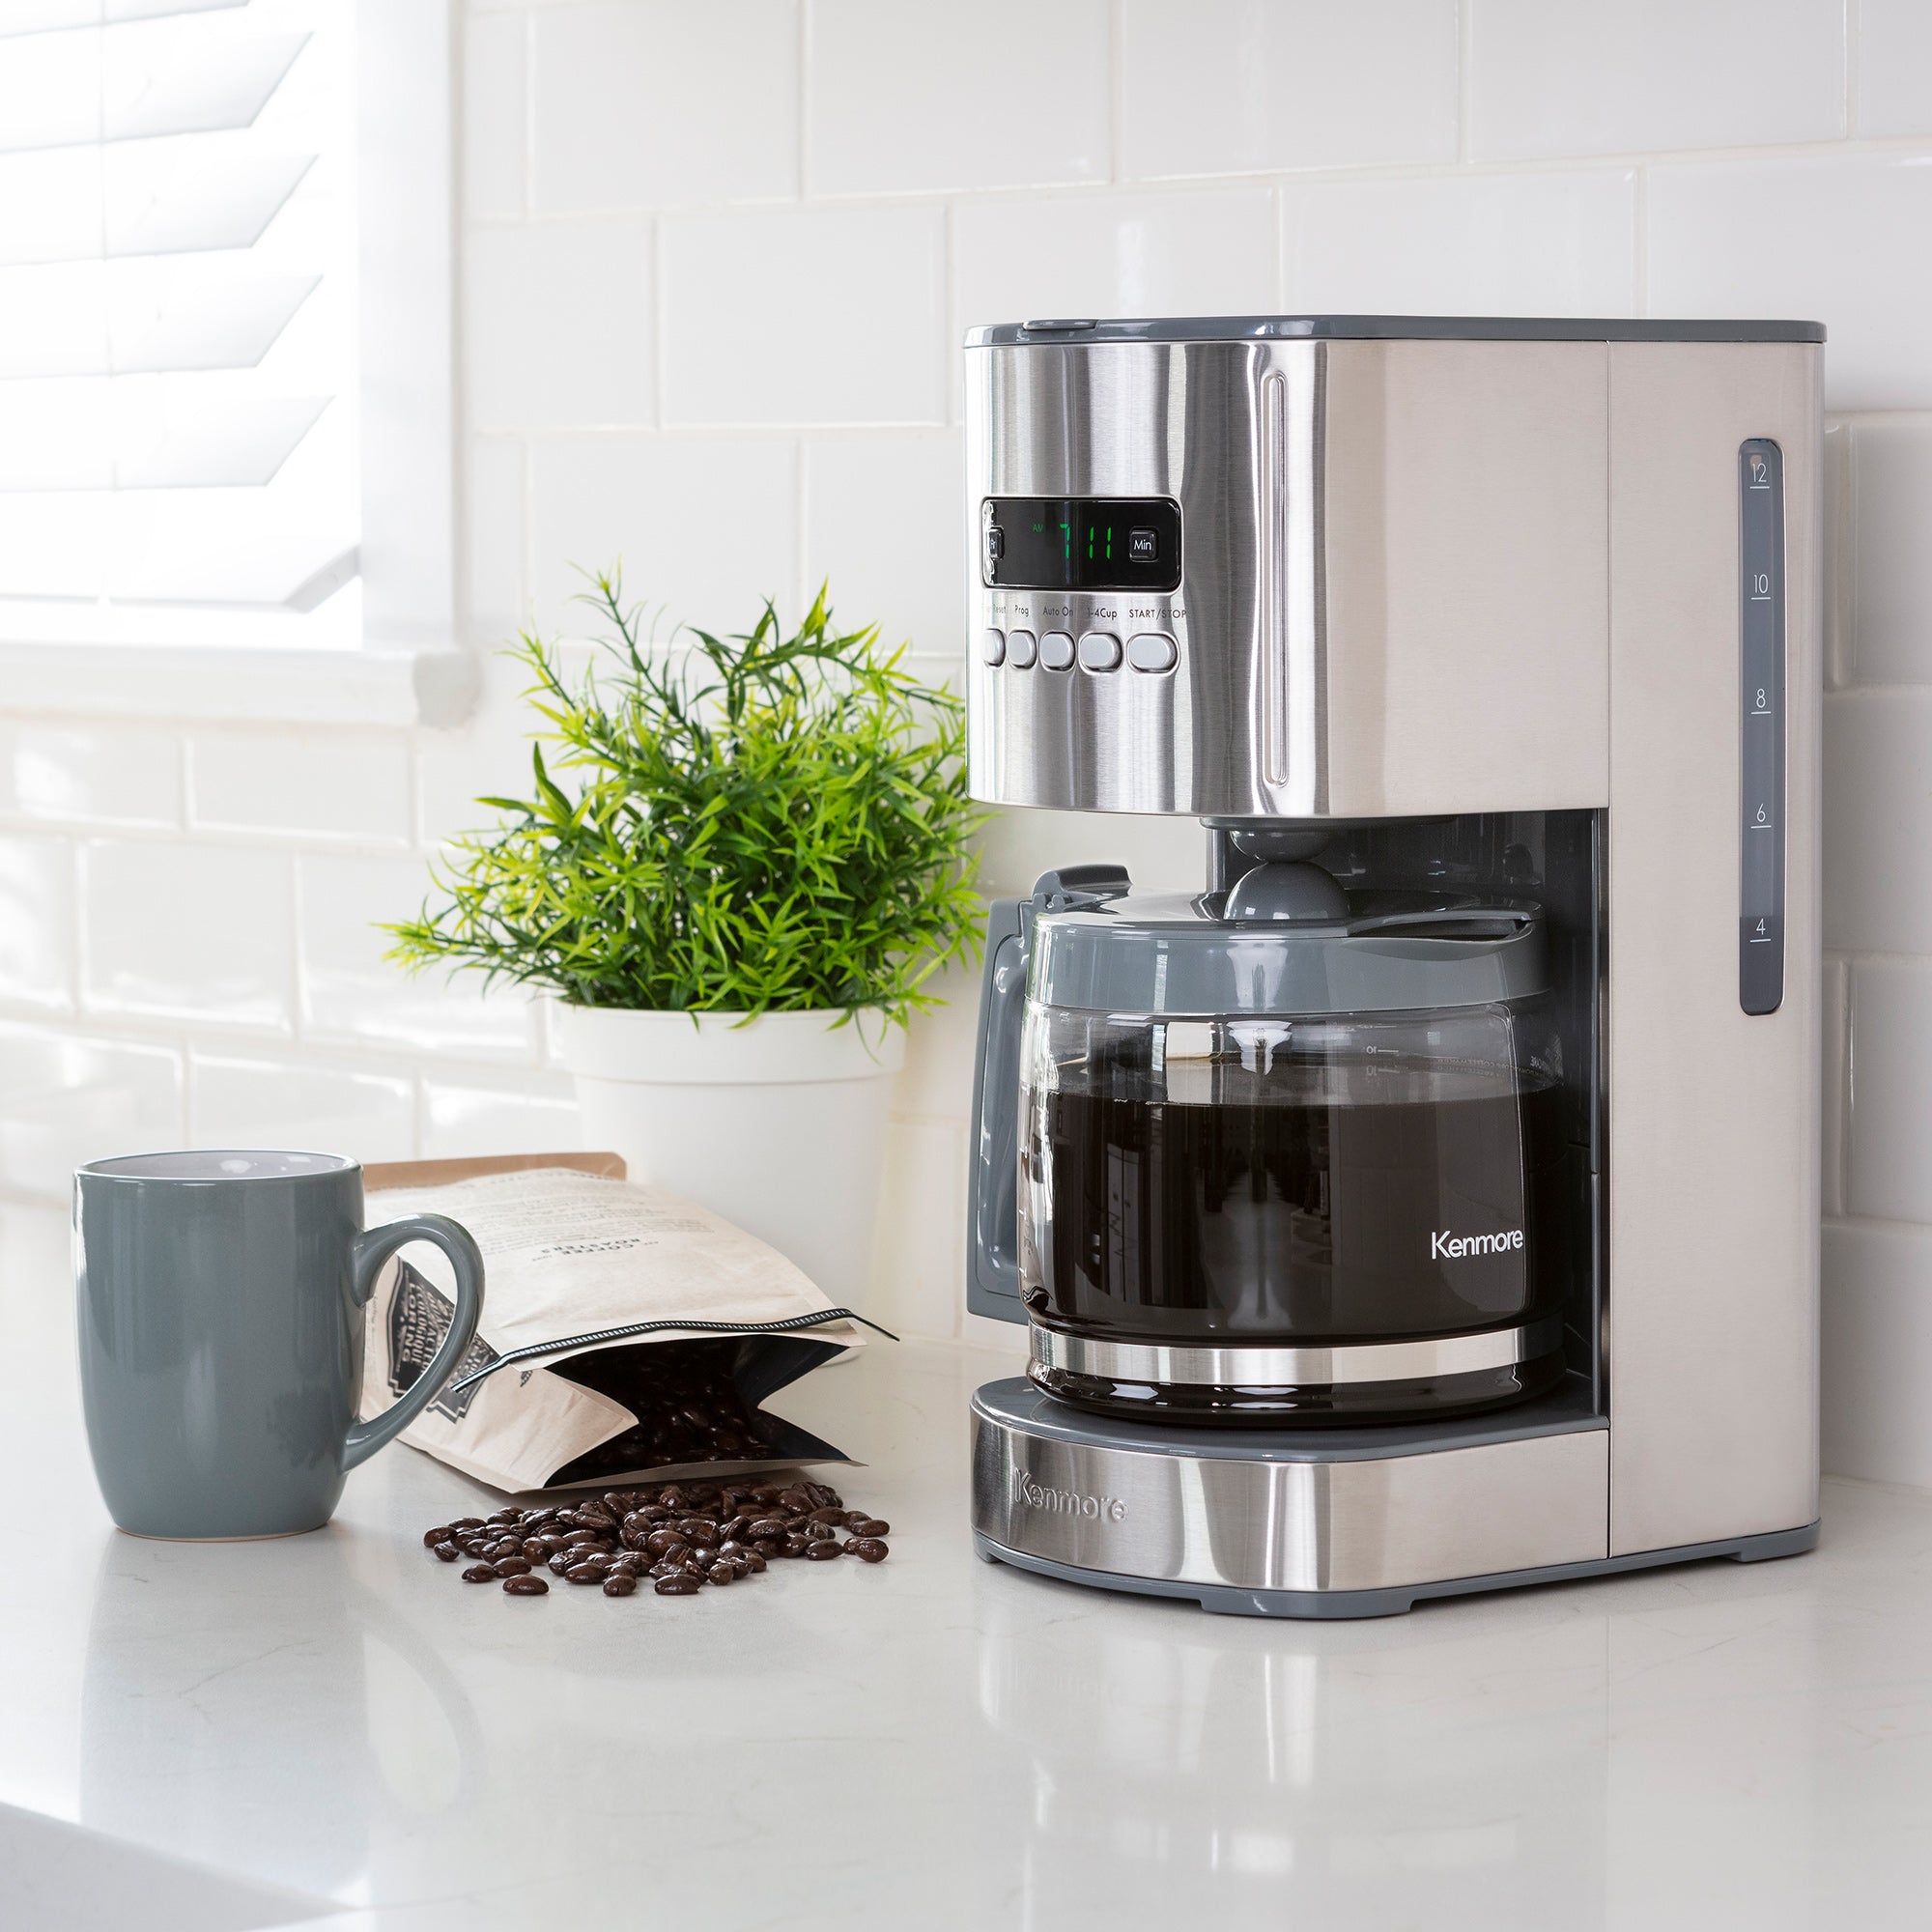 Kenmore 12 cup programmable coffeemaker on a light gray countertop with white tile backsplash behind and a mug, bag of coffee beans, and potted plant beside it